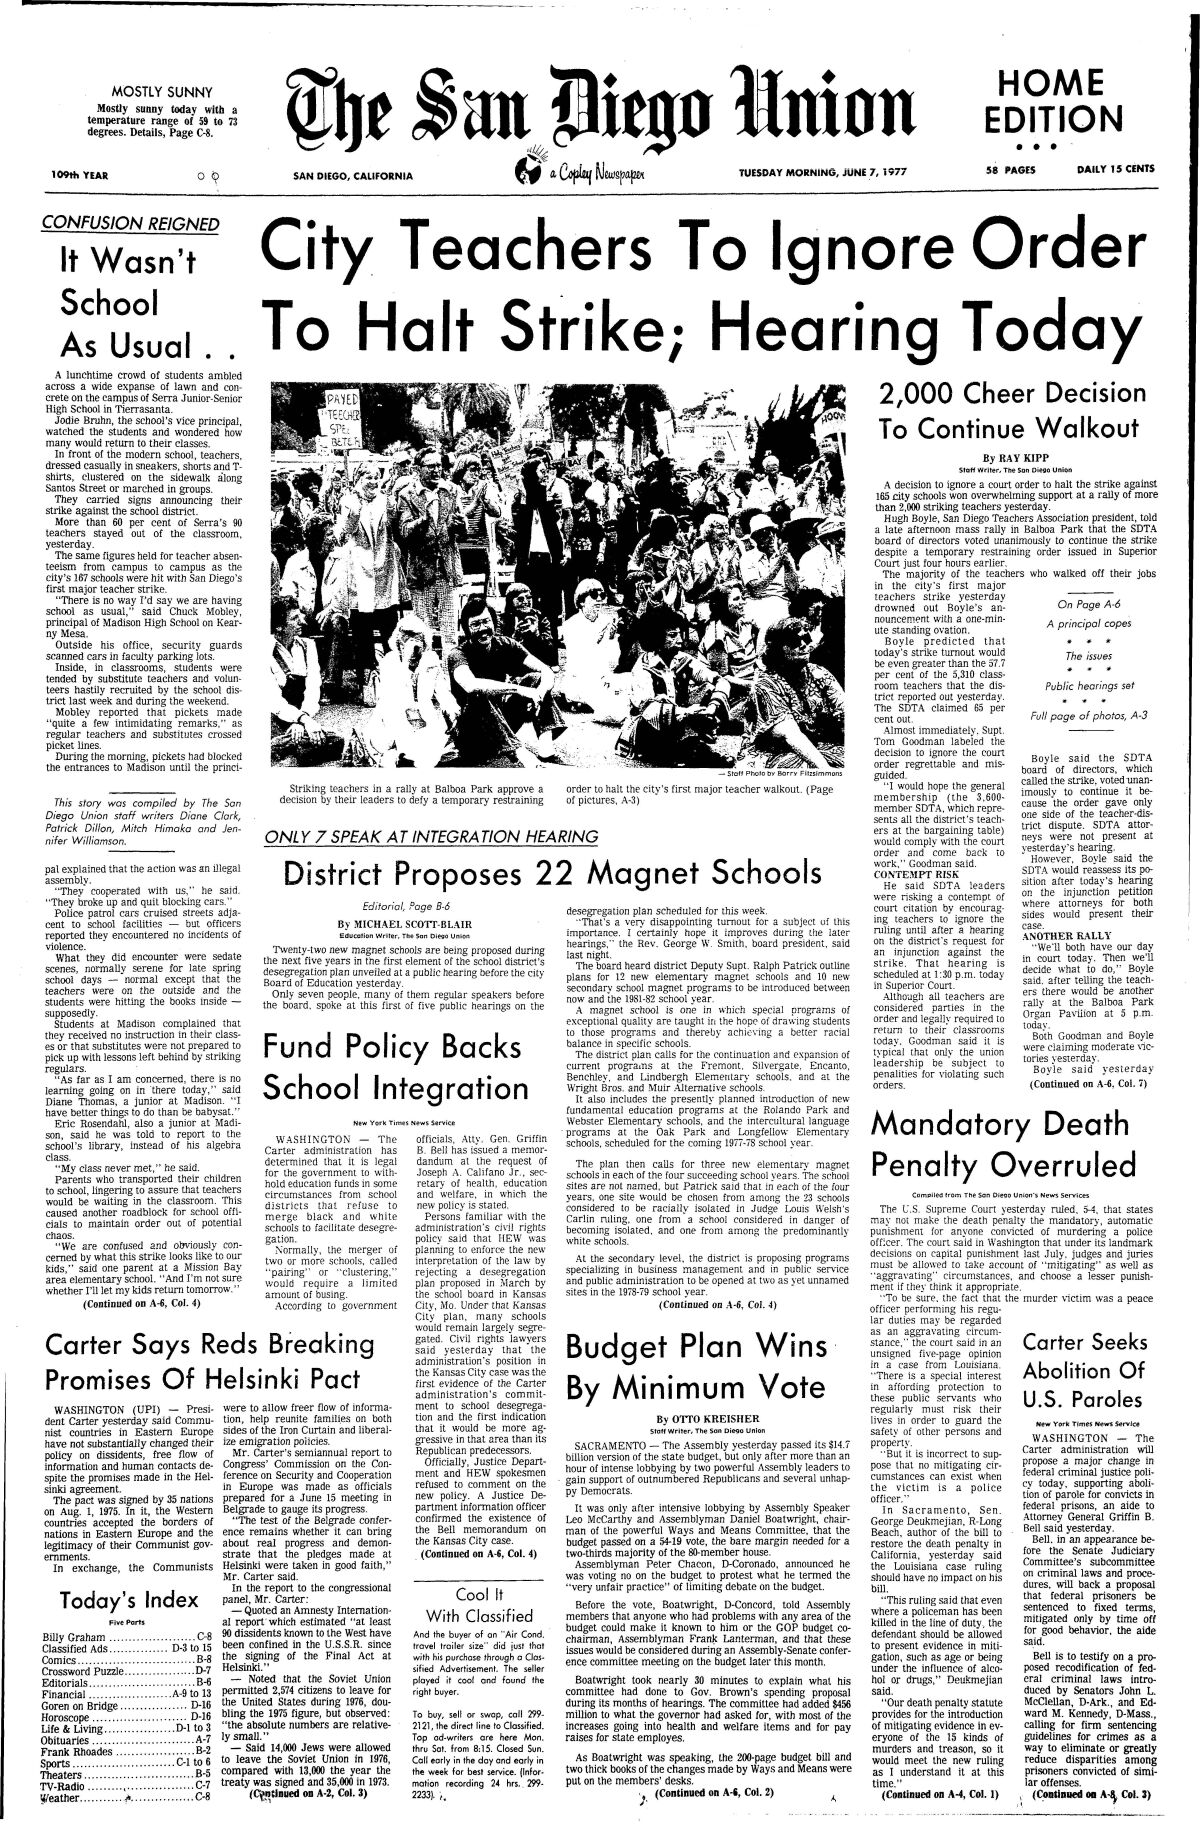 Front page of The San Diego Union, June 7, 1977.